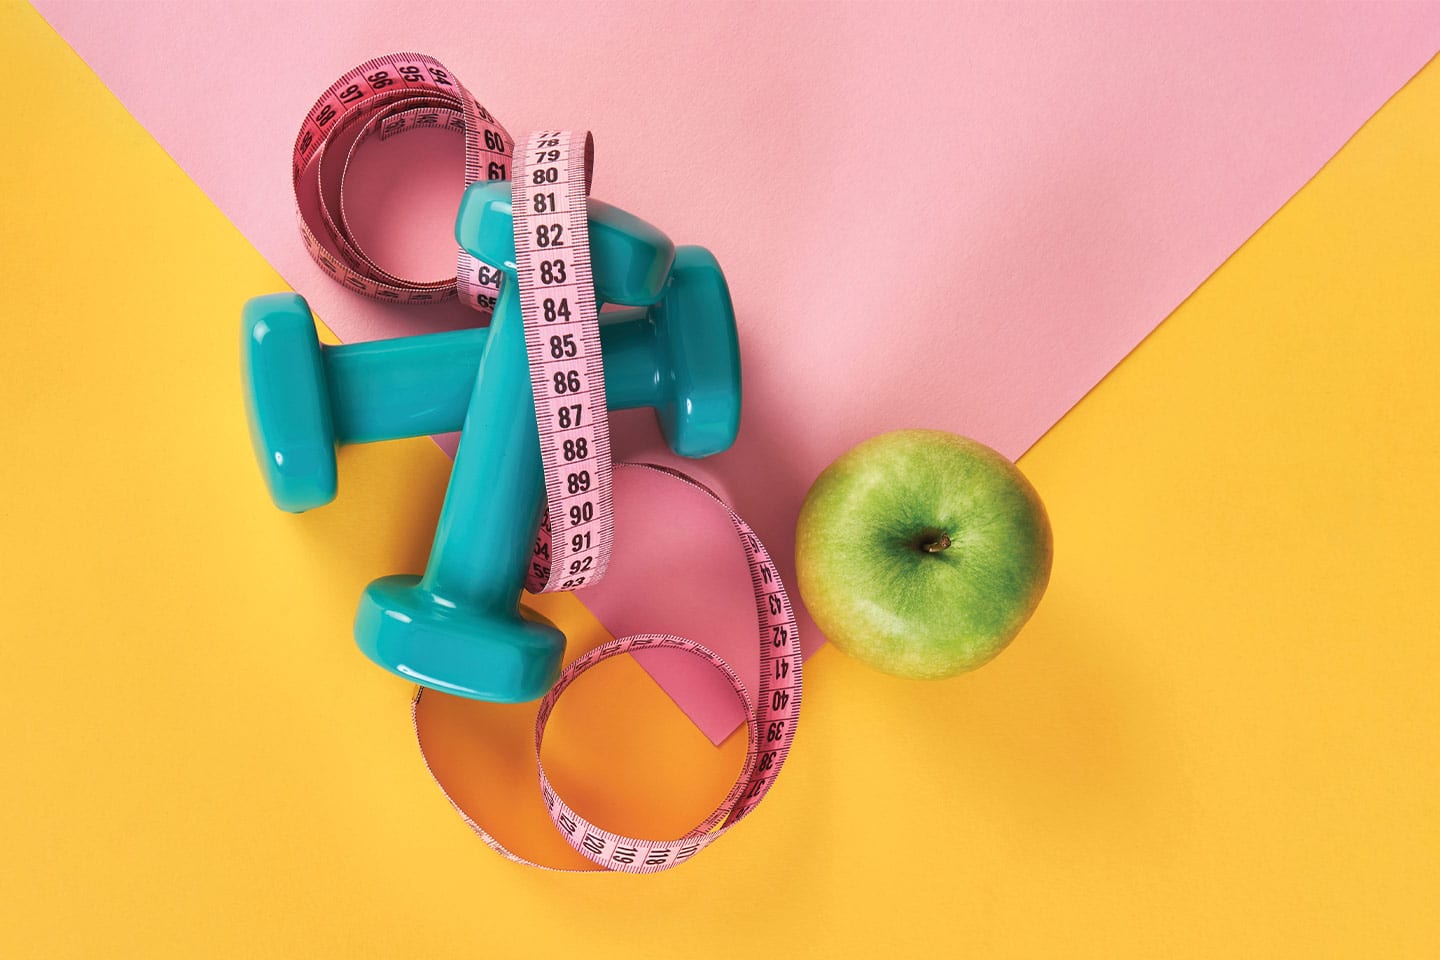 Weights, tape measurer, and a green apple